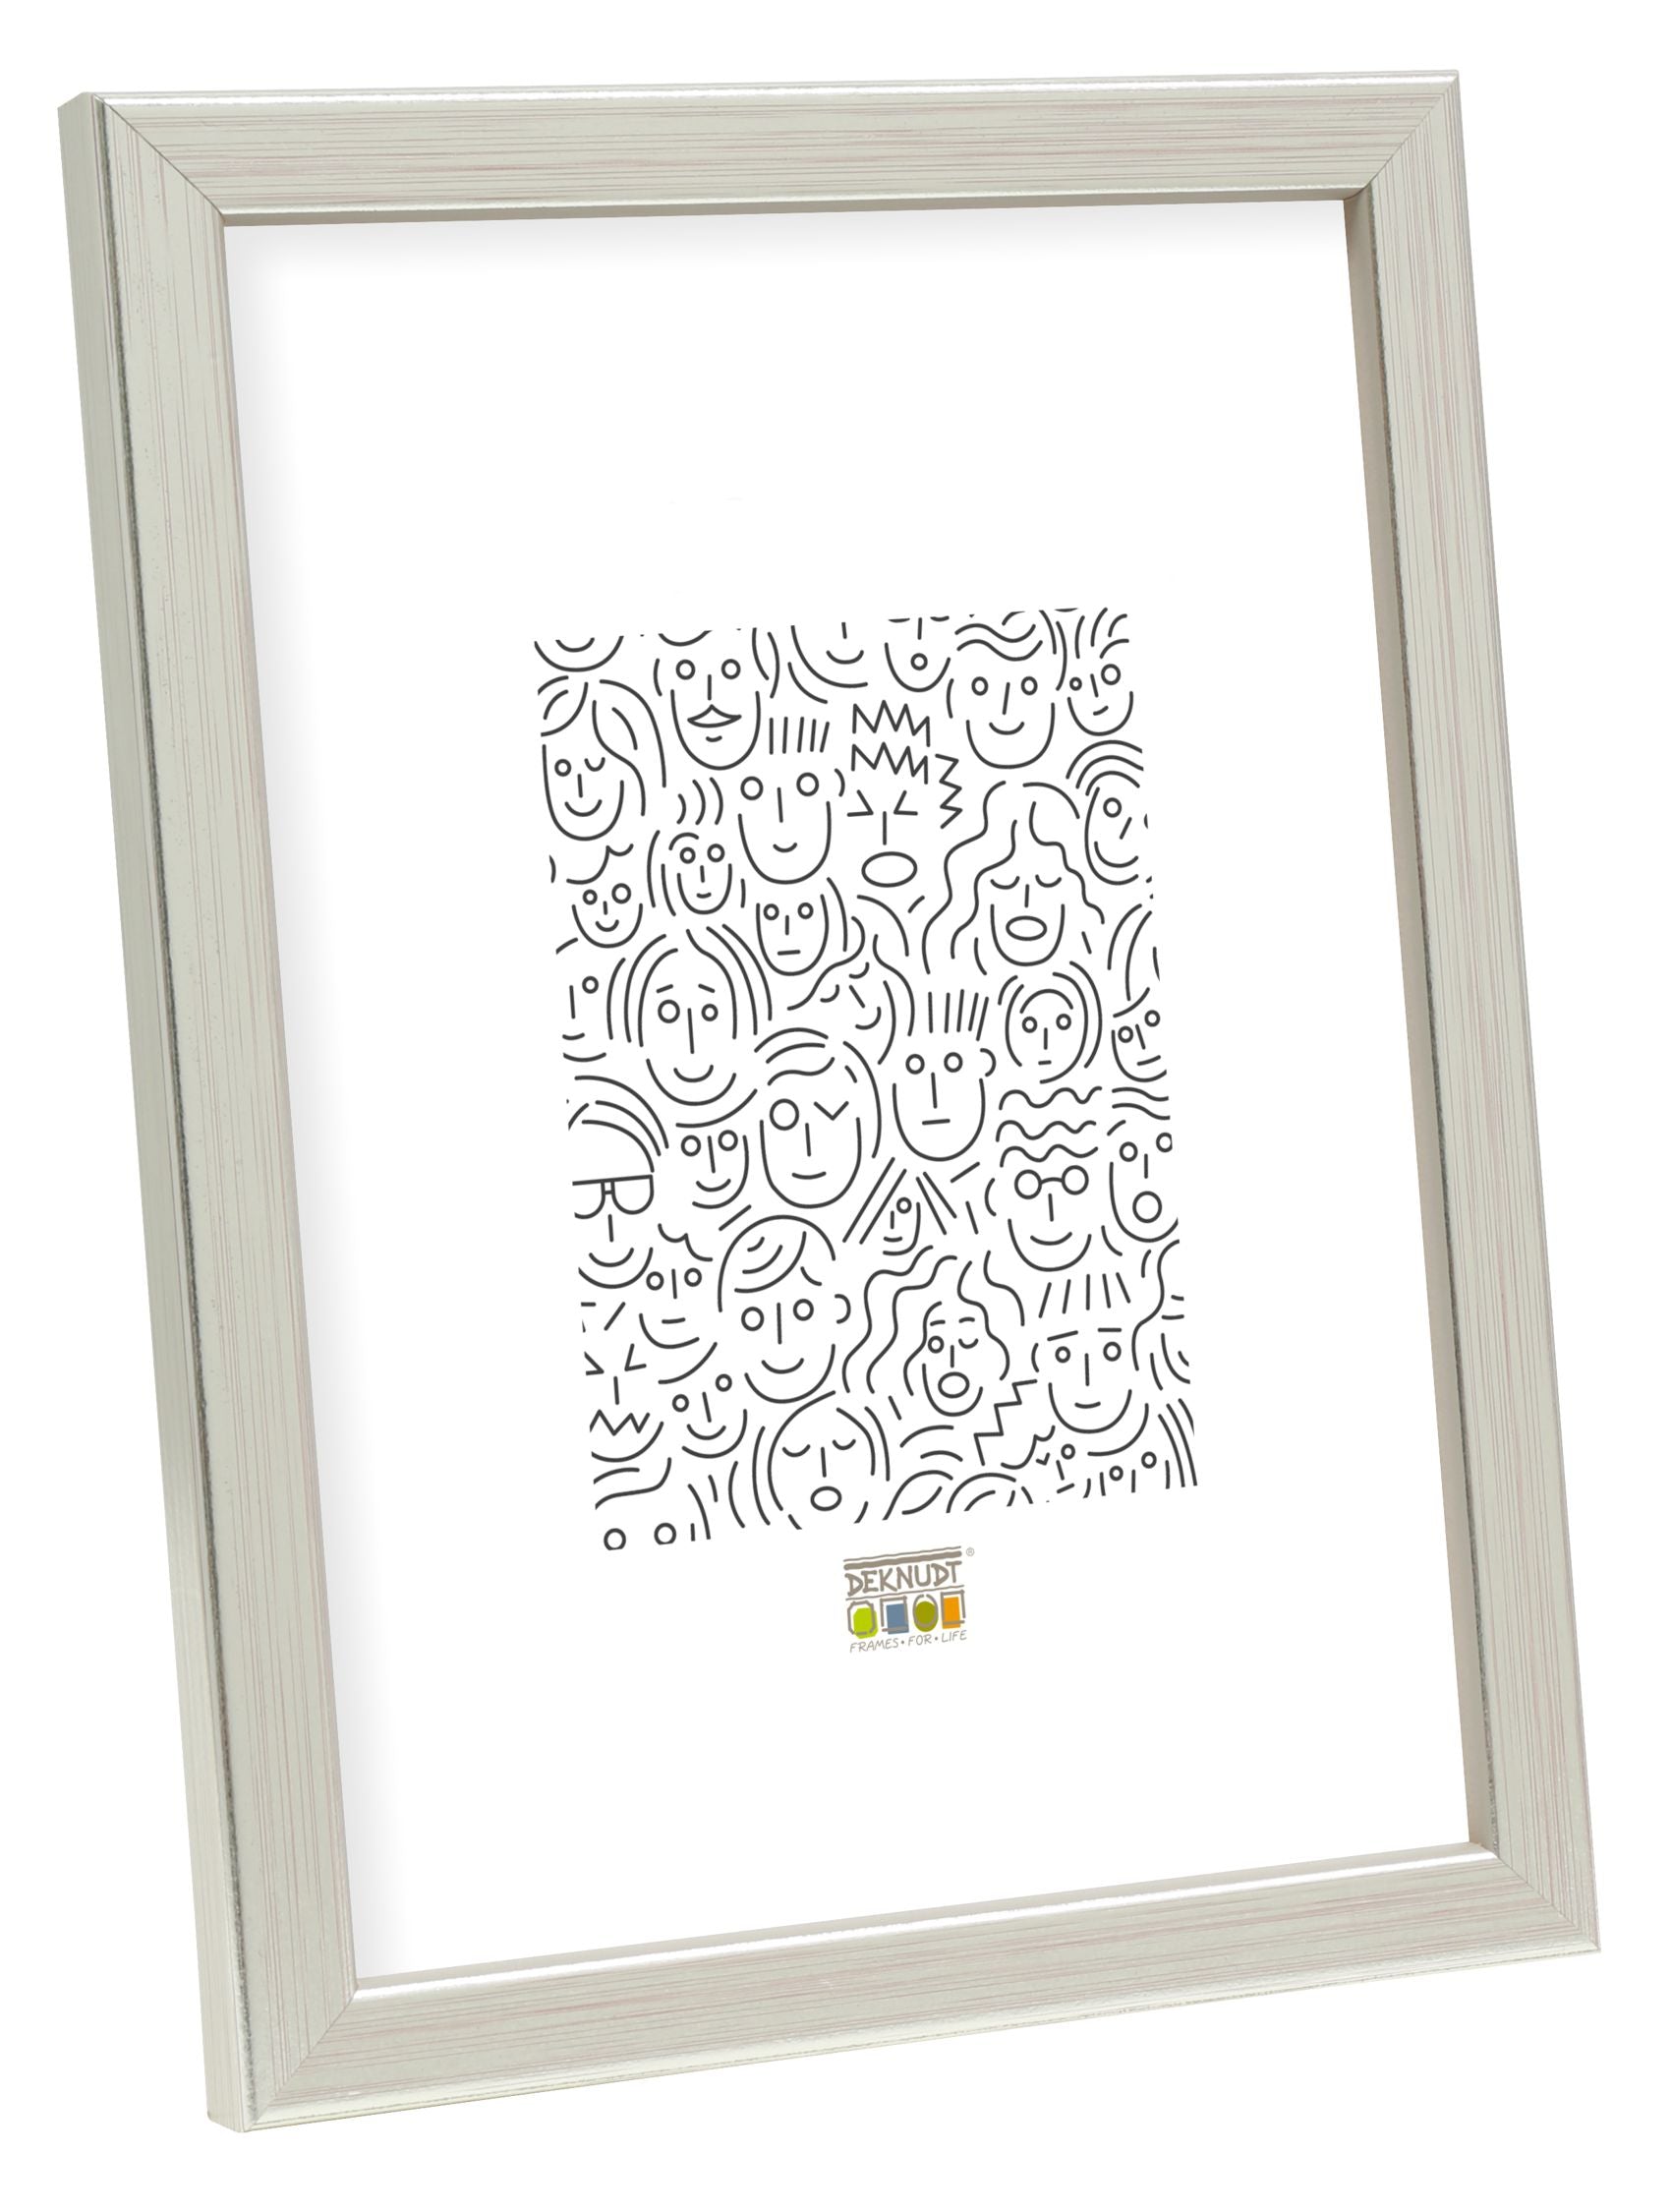 Wooden frame in silver color